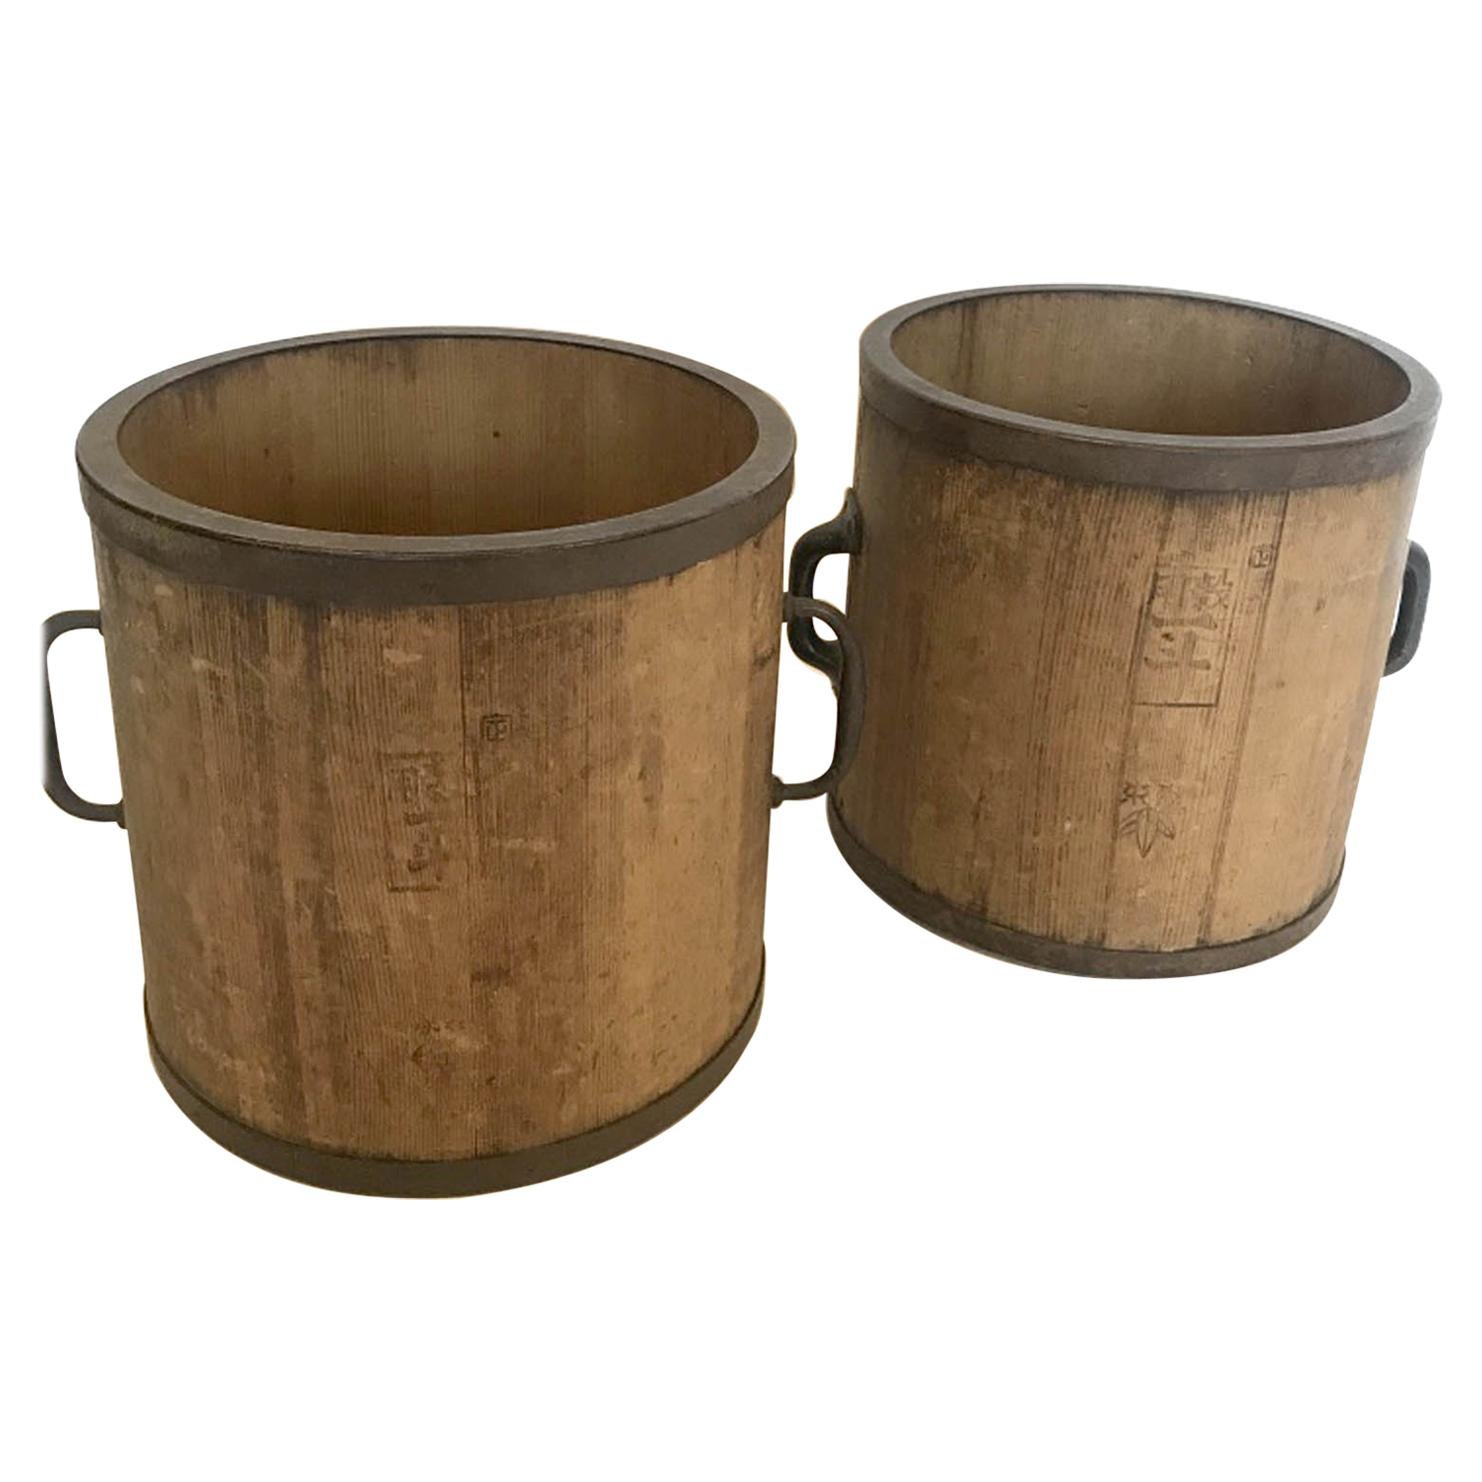 19th Century Japanese Rice Containers